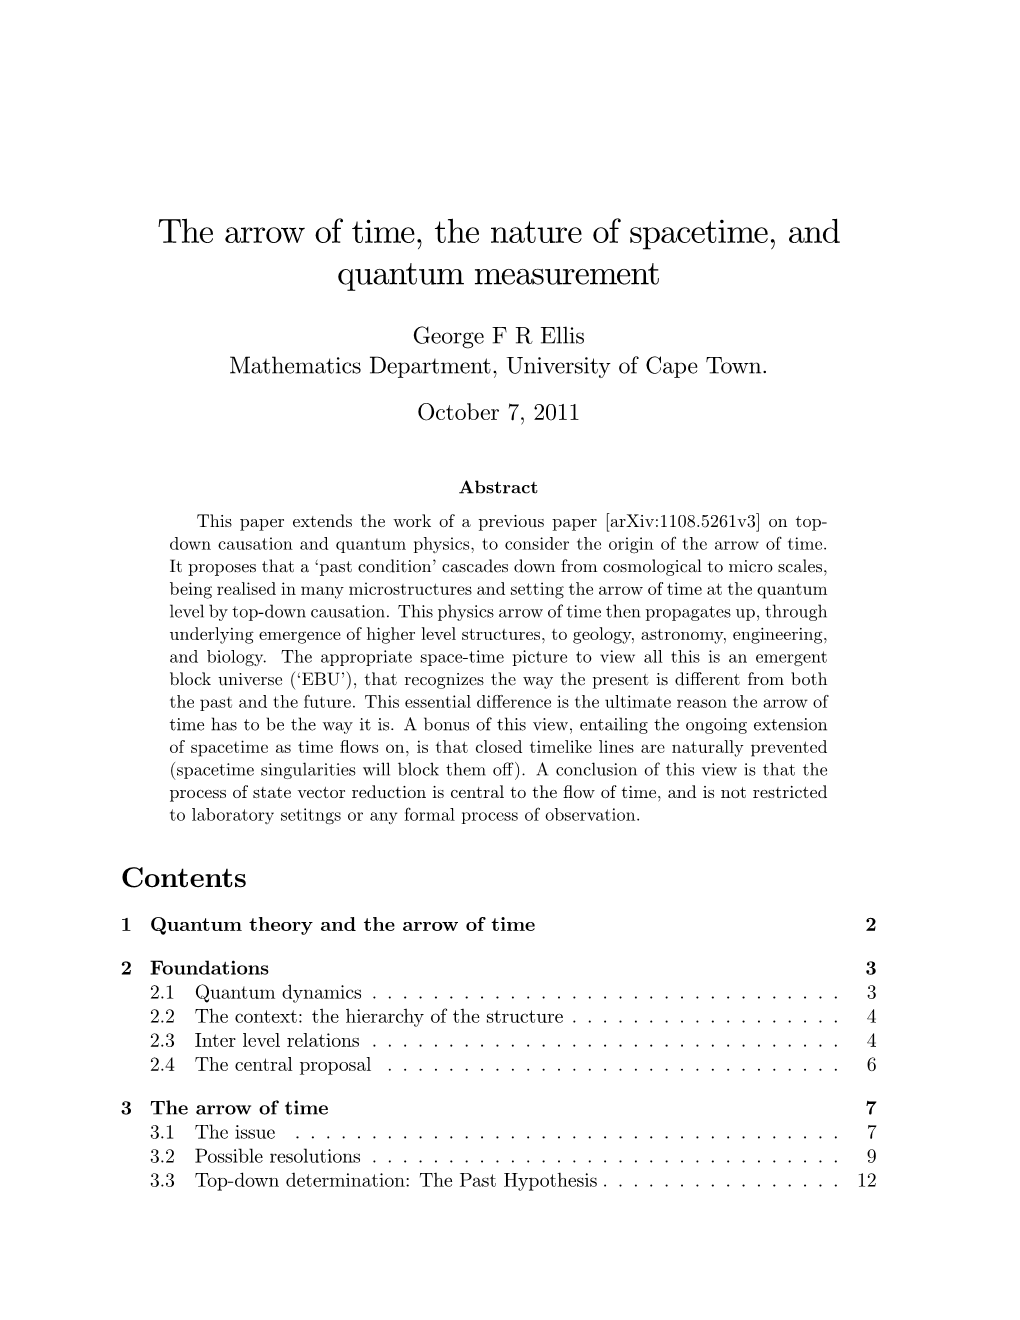 The Arrow of Time, the Nature of Spacetime, and Quantum Measurement